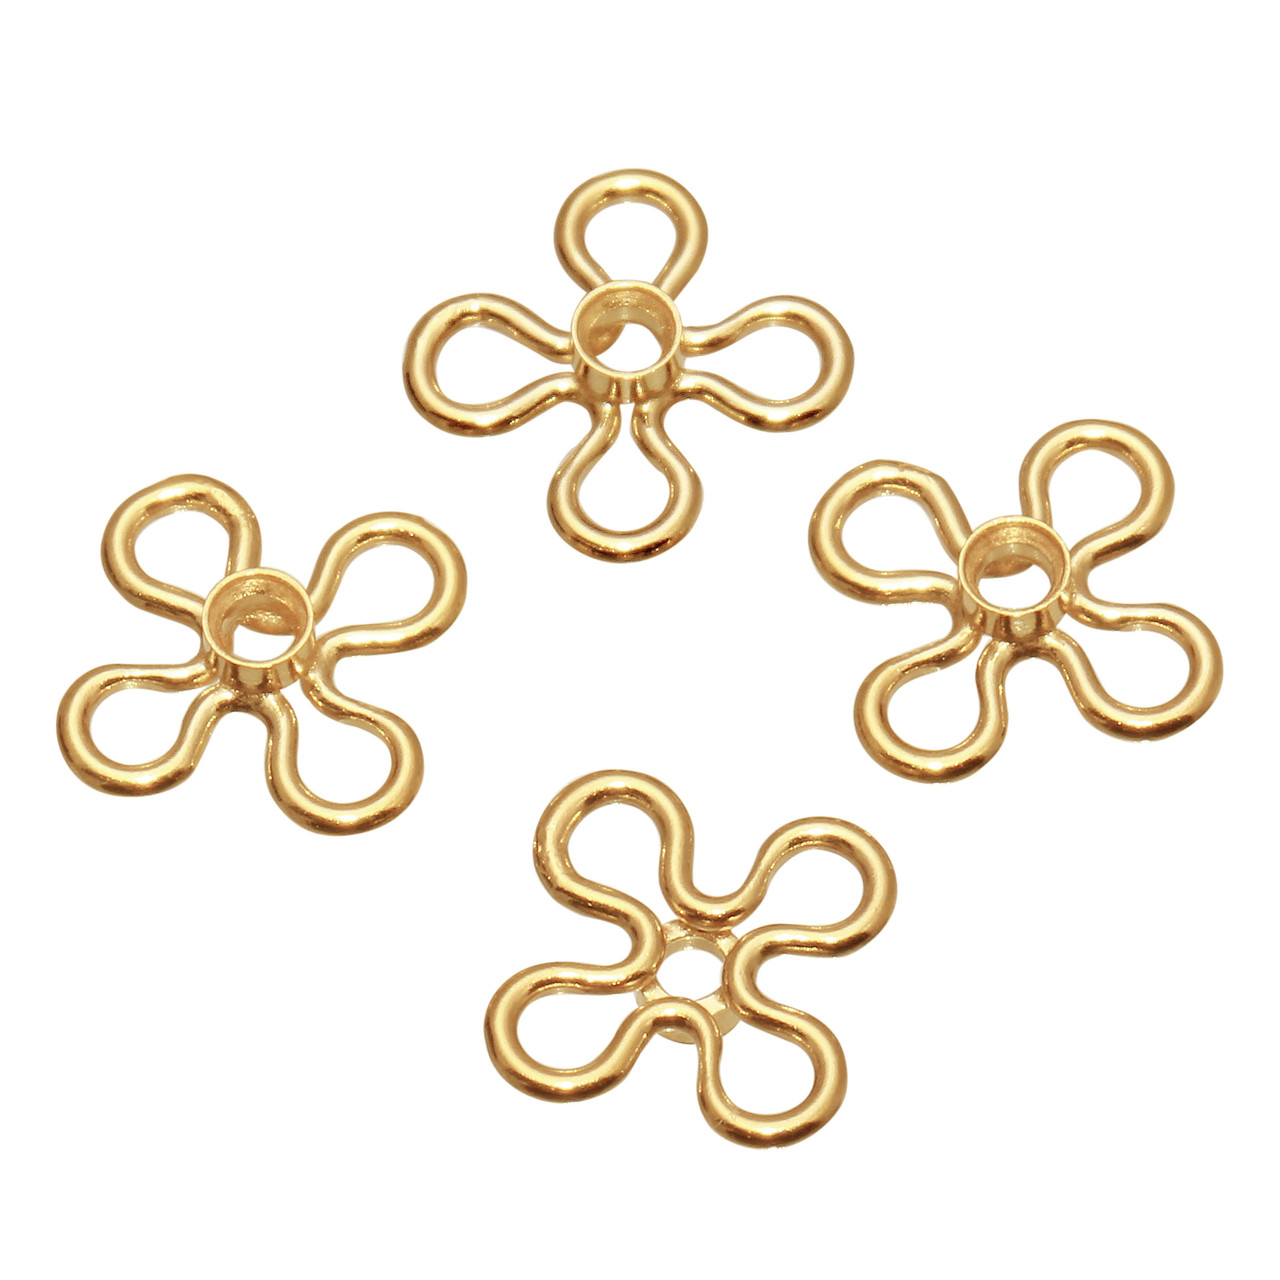 1 PC Bag of 7.5 mm 14K Gold Filled Flower Connector Charm with 2 mm Bezel (GFP100133)